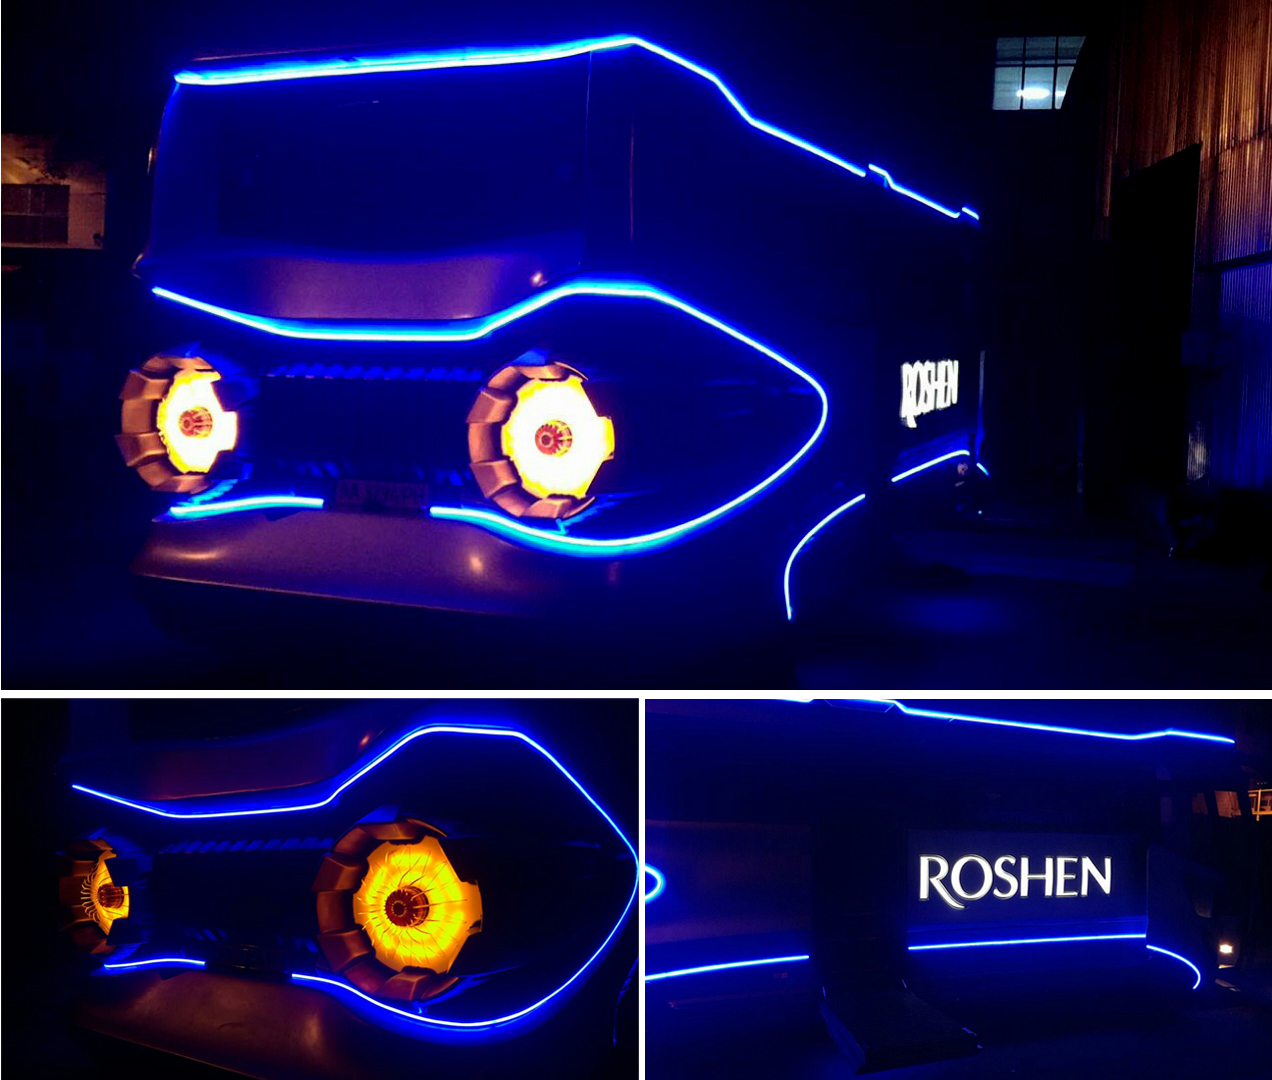  bus for the Roshen company